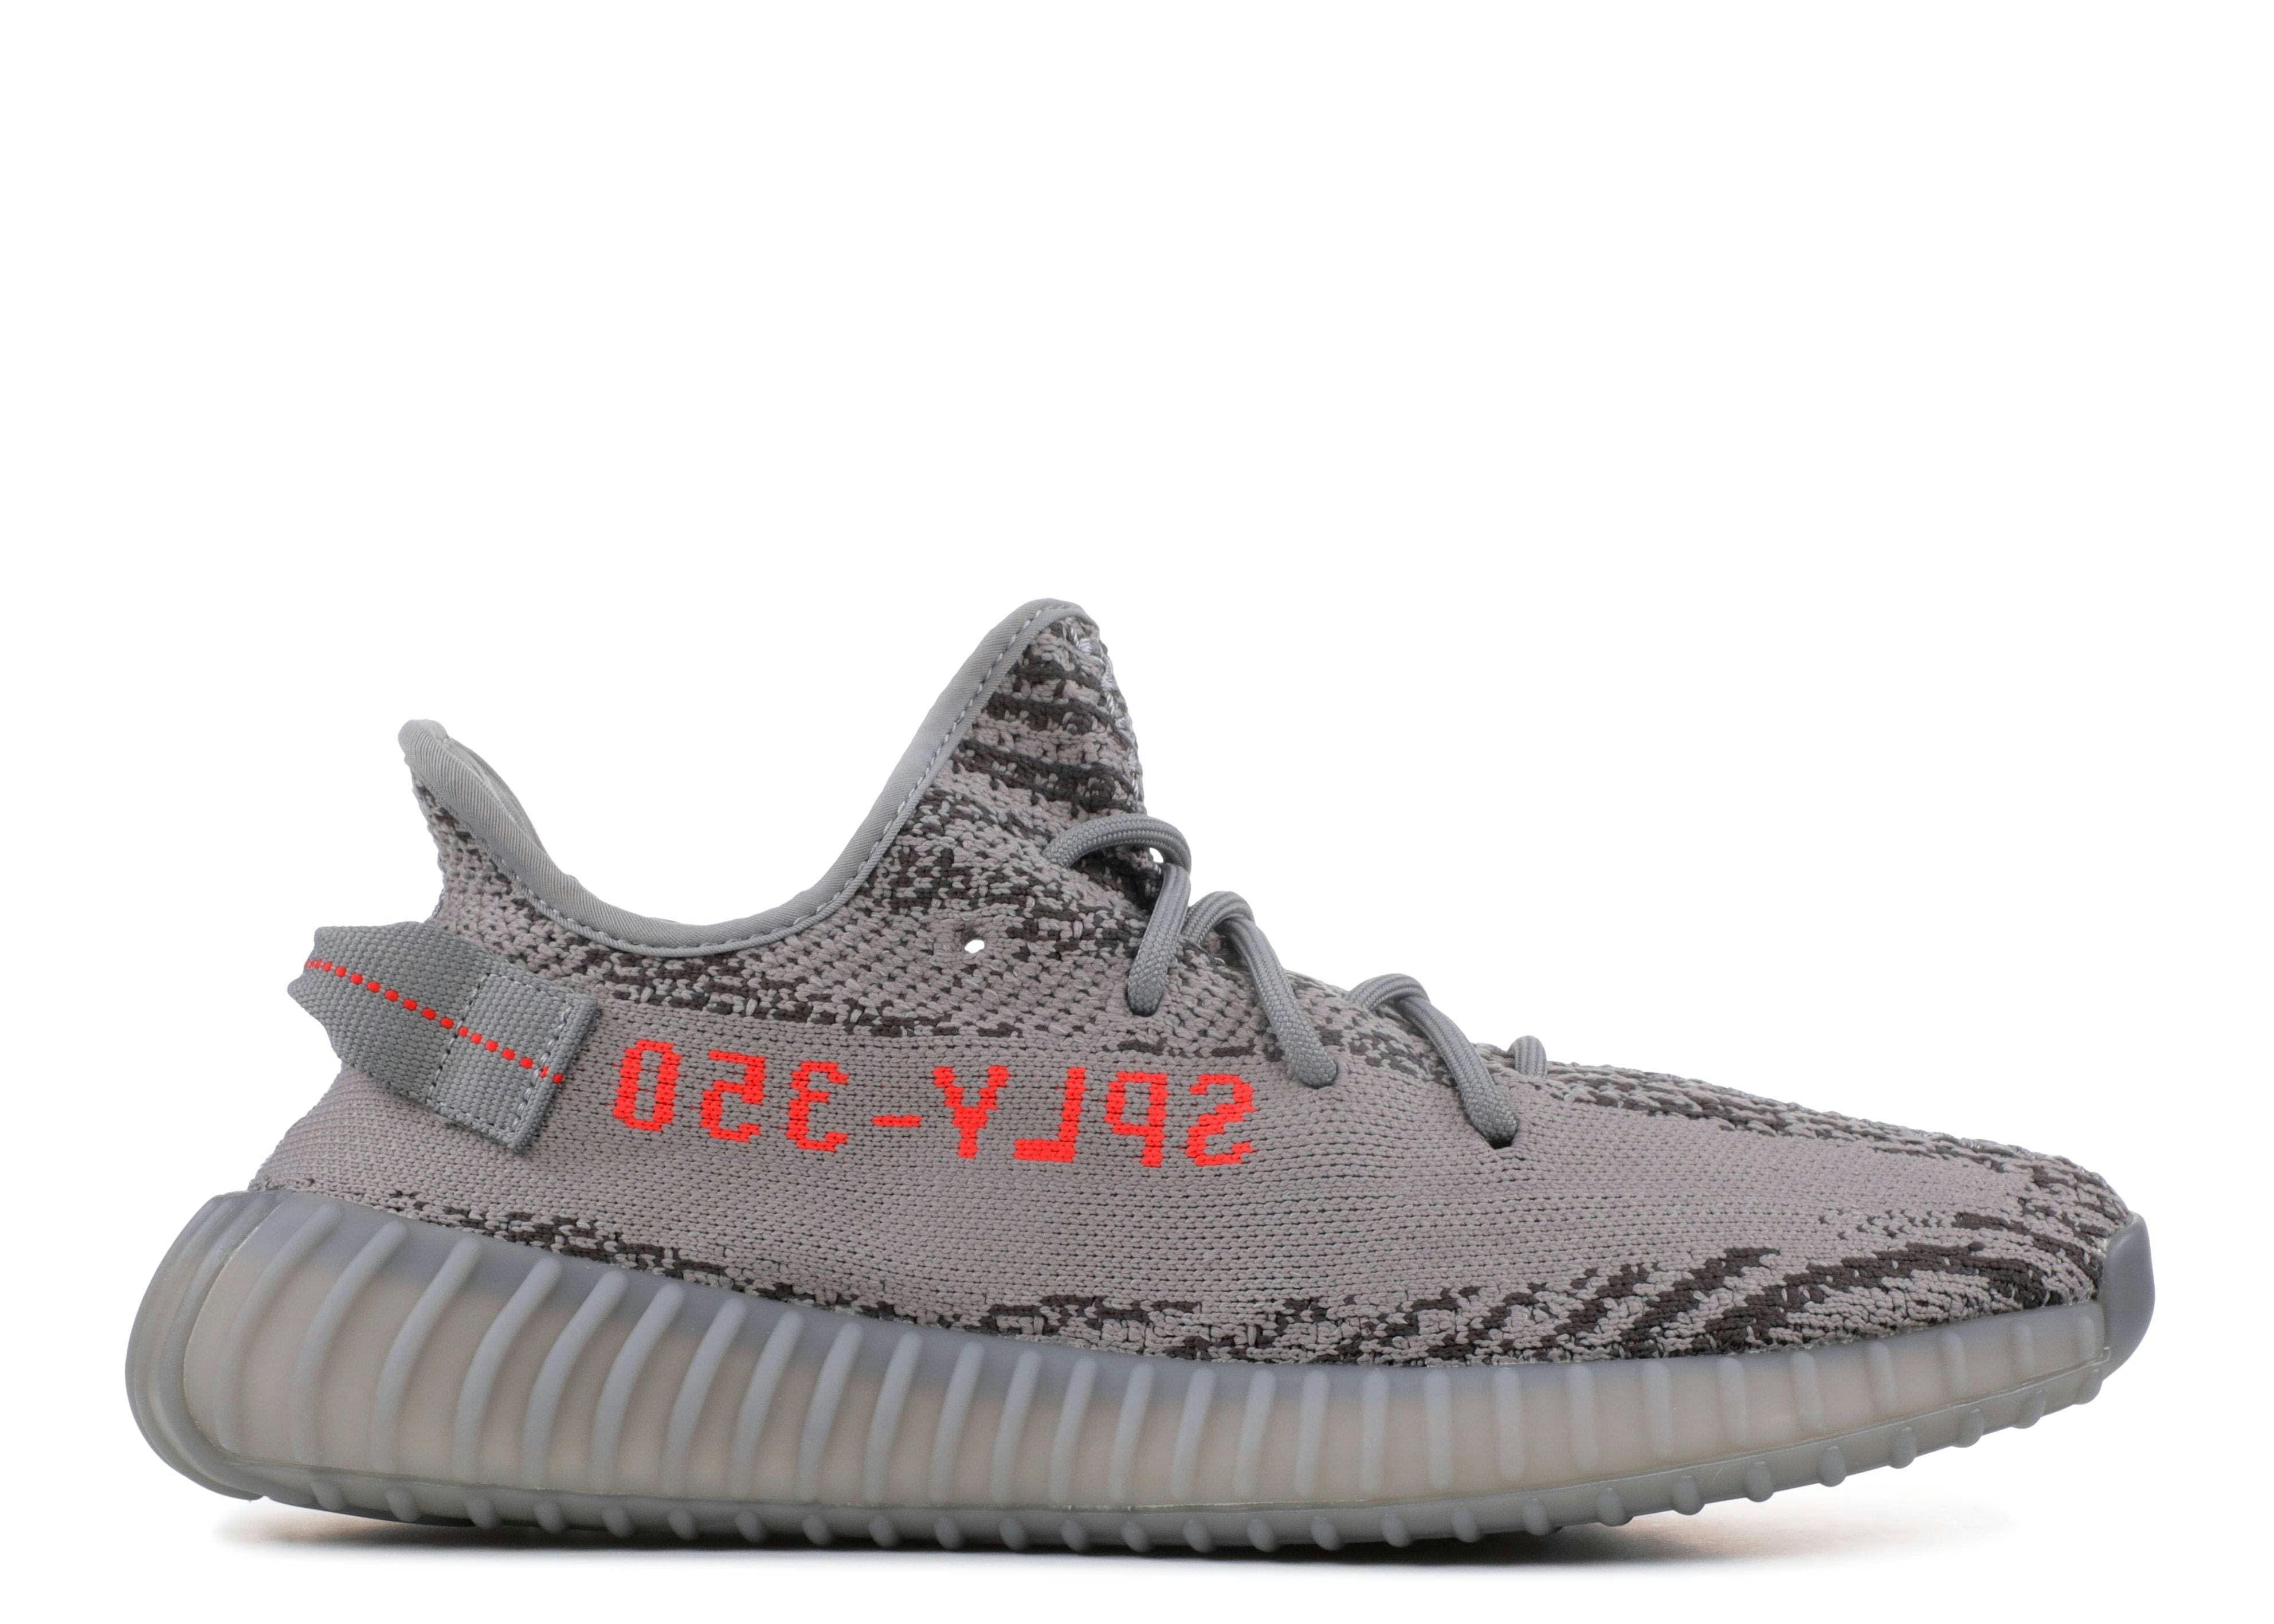 adidas YEEZY Boost 350 V2 Review